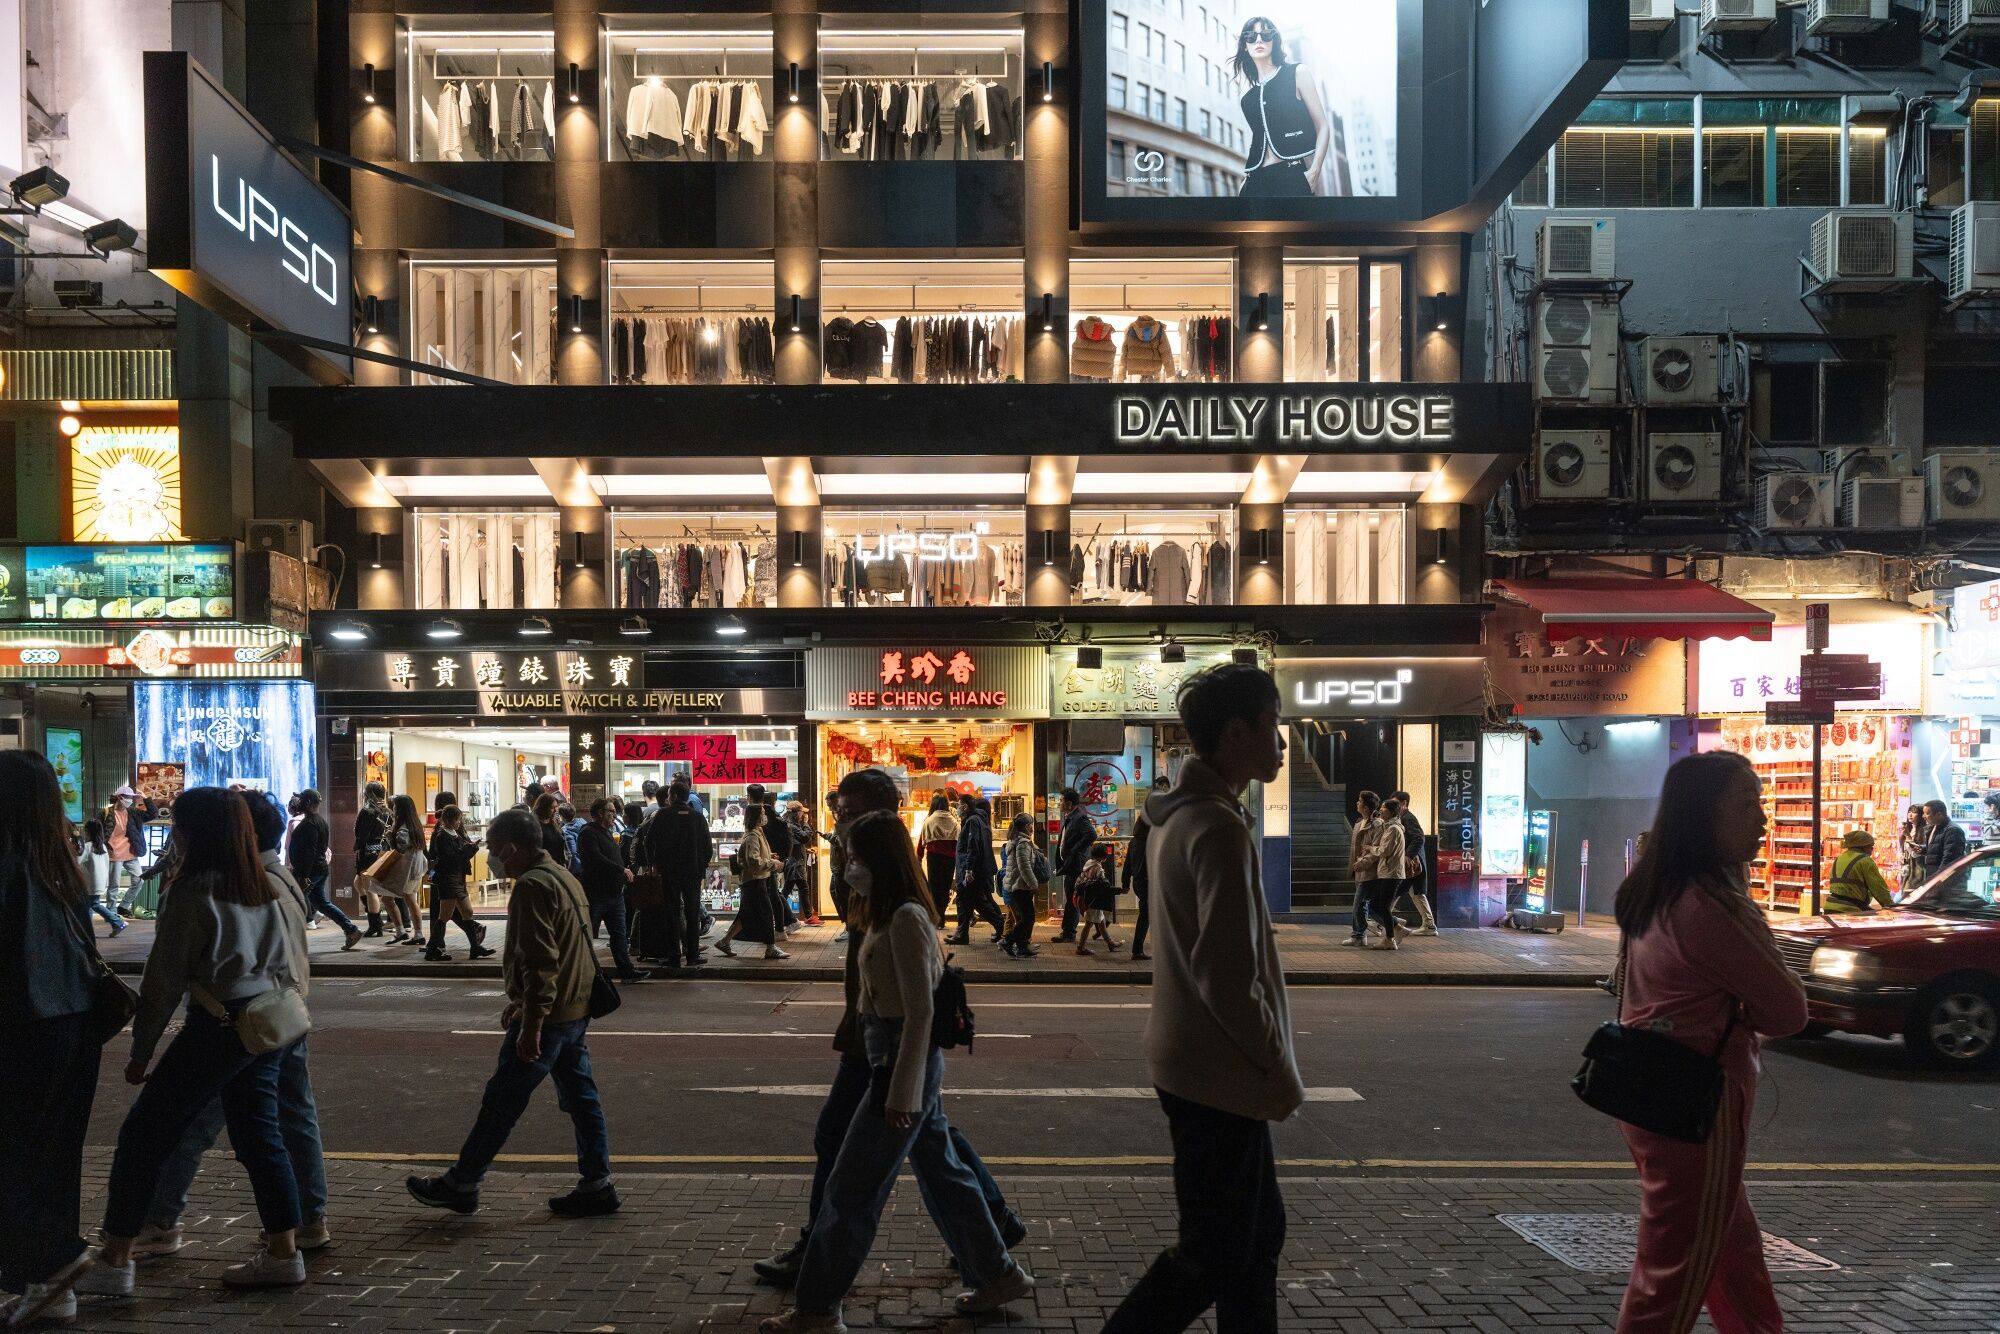 Pedestrians walk past stores in Hong Kong’s Tsim Sha Tsui district during the Lunar New Year holiday on February 12. Hong Kong should invest in improving the city’s public areas, rather than spend money on trying to revitalise our traditional shopping and nightlife scene. Photo: Bloomberg